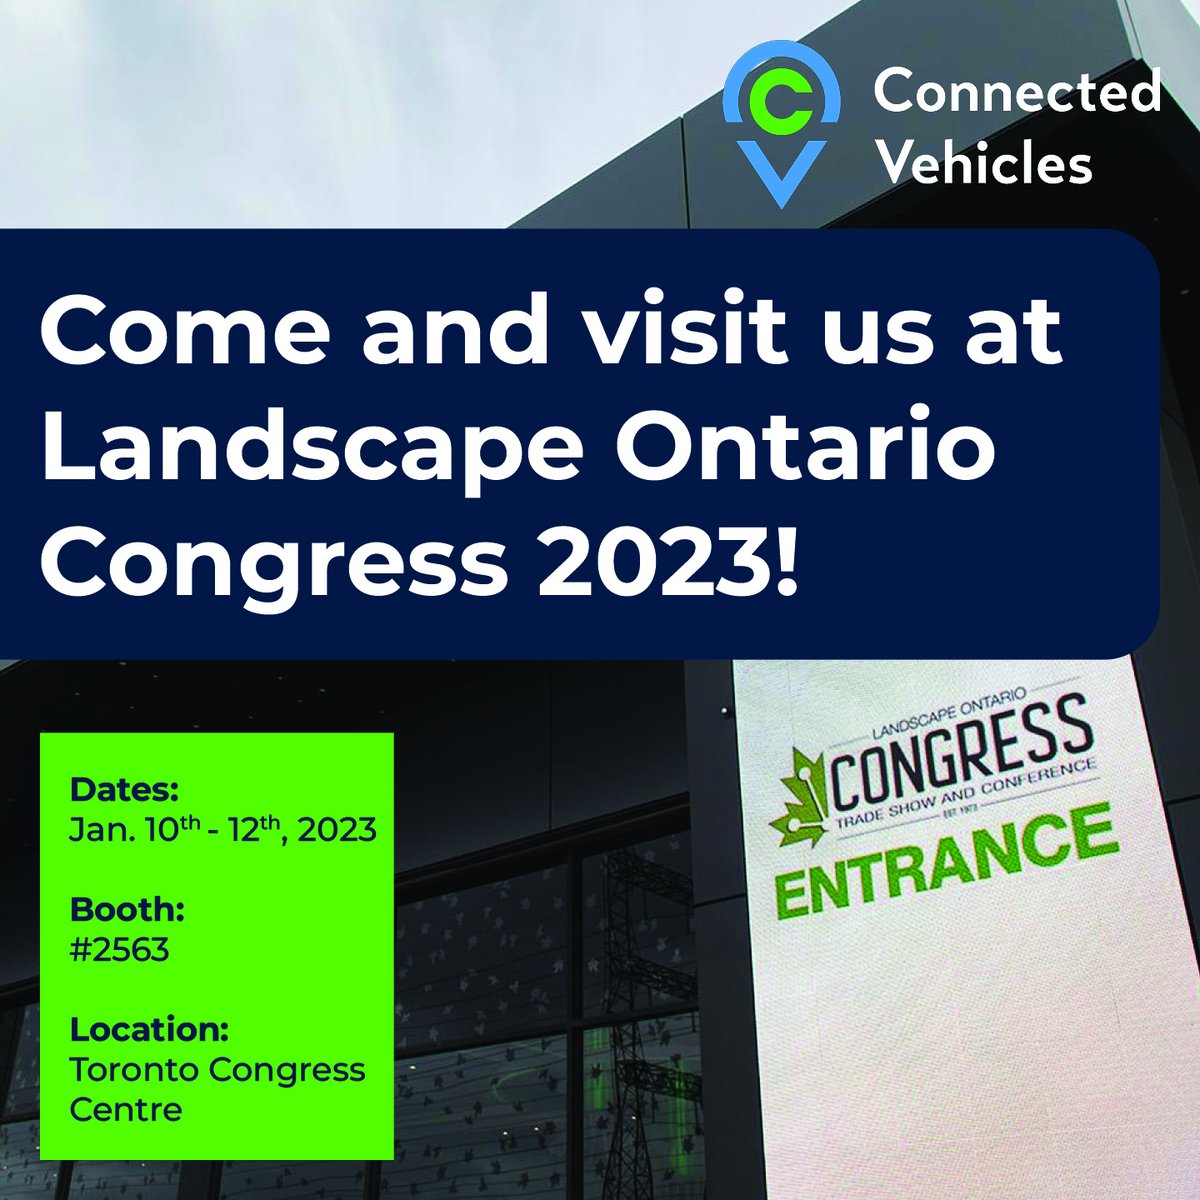 We are officially one week away from the Landscape Ontario Congress 2023! Join us at booth #2563 #connectedvehicles #assettracking #landscapeontario #locongress #locongress2023 #congress #2023 #fleet #tracking #assets #vehicles #compliance #getcompliant #ontariolandscaping